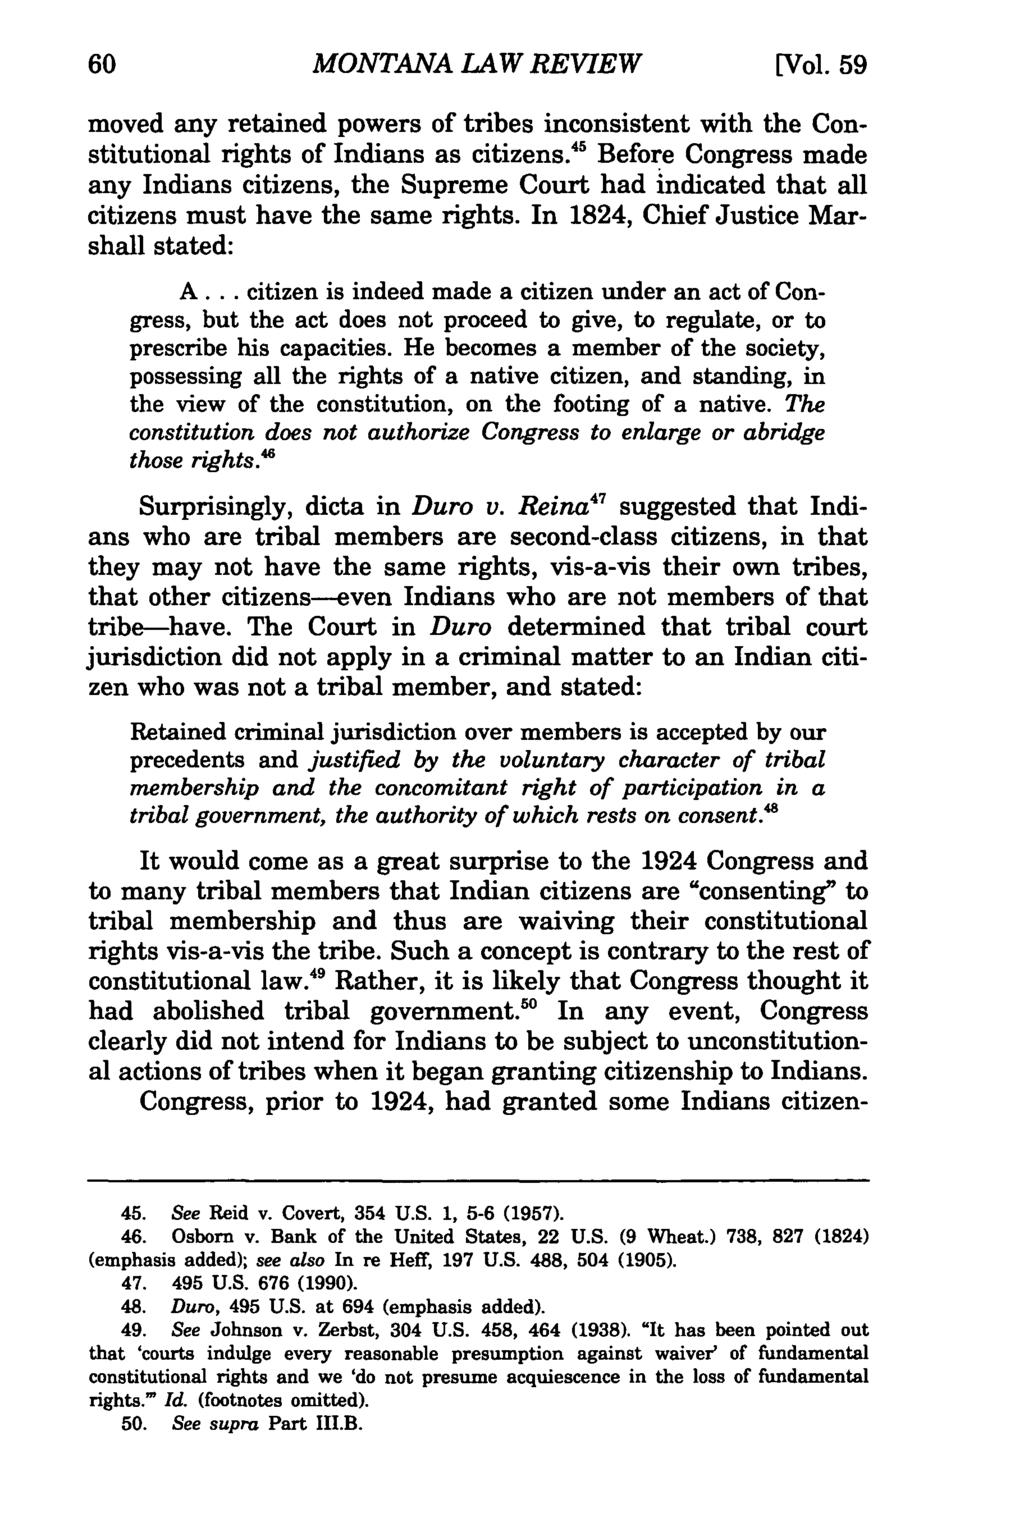 Montana MONTANA Law Review, LAW Vol. 59 REVIEW [1998], Iss. 1, Art. 4 [Vol. 59 moved any retained powers of tribes inconsistent with the Constitutional rights of Indians as citizens.